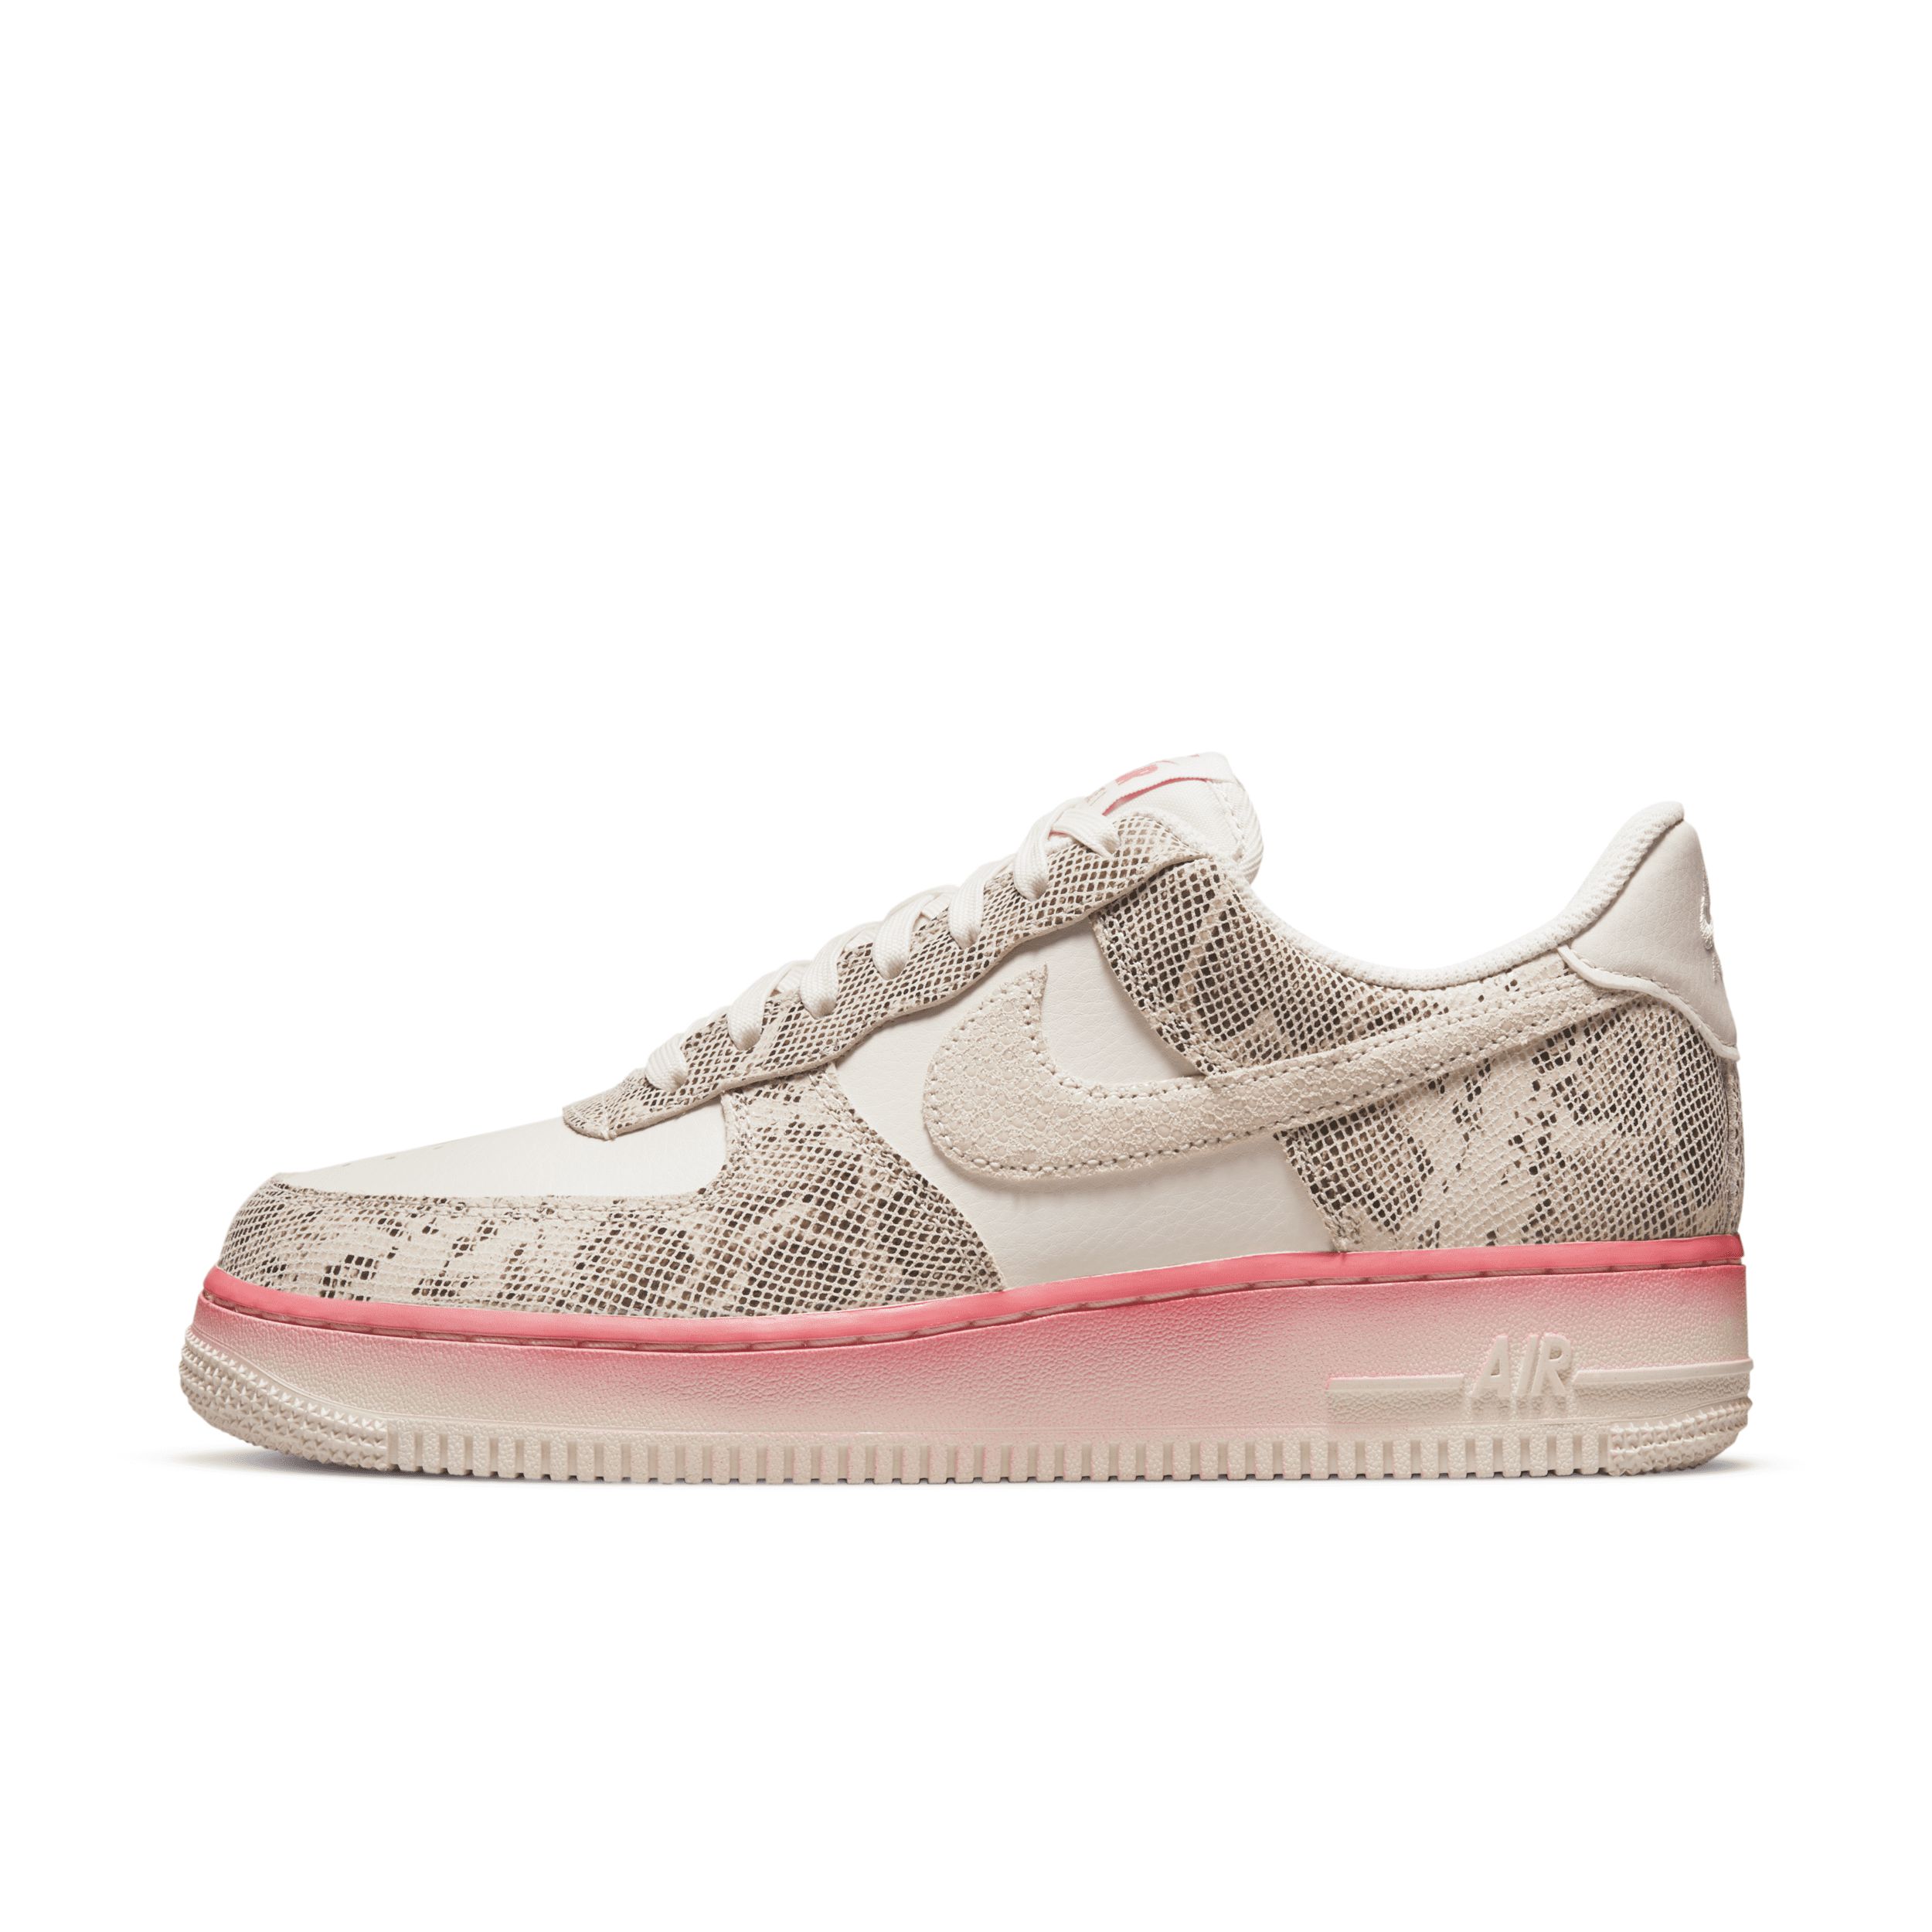 Nike Women's Air Force 1 '07 LX Shoes in Grey, Size: 5.5 | DV1031-030 | Nike (US)